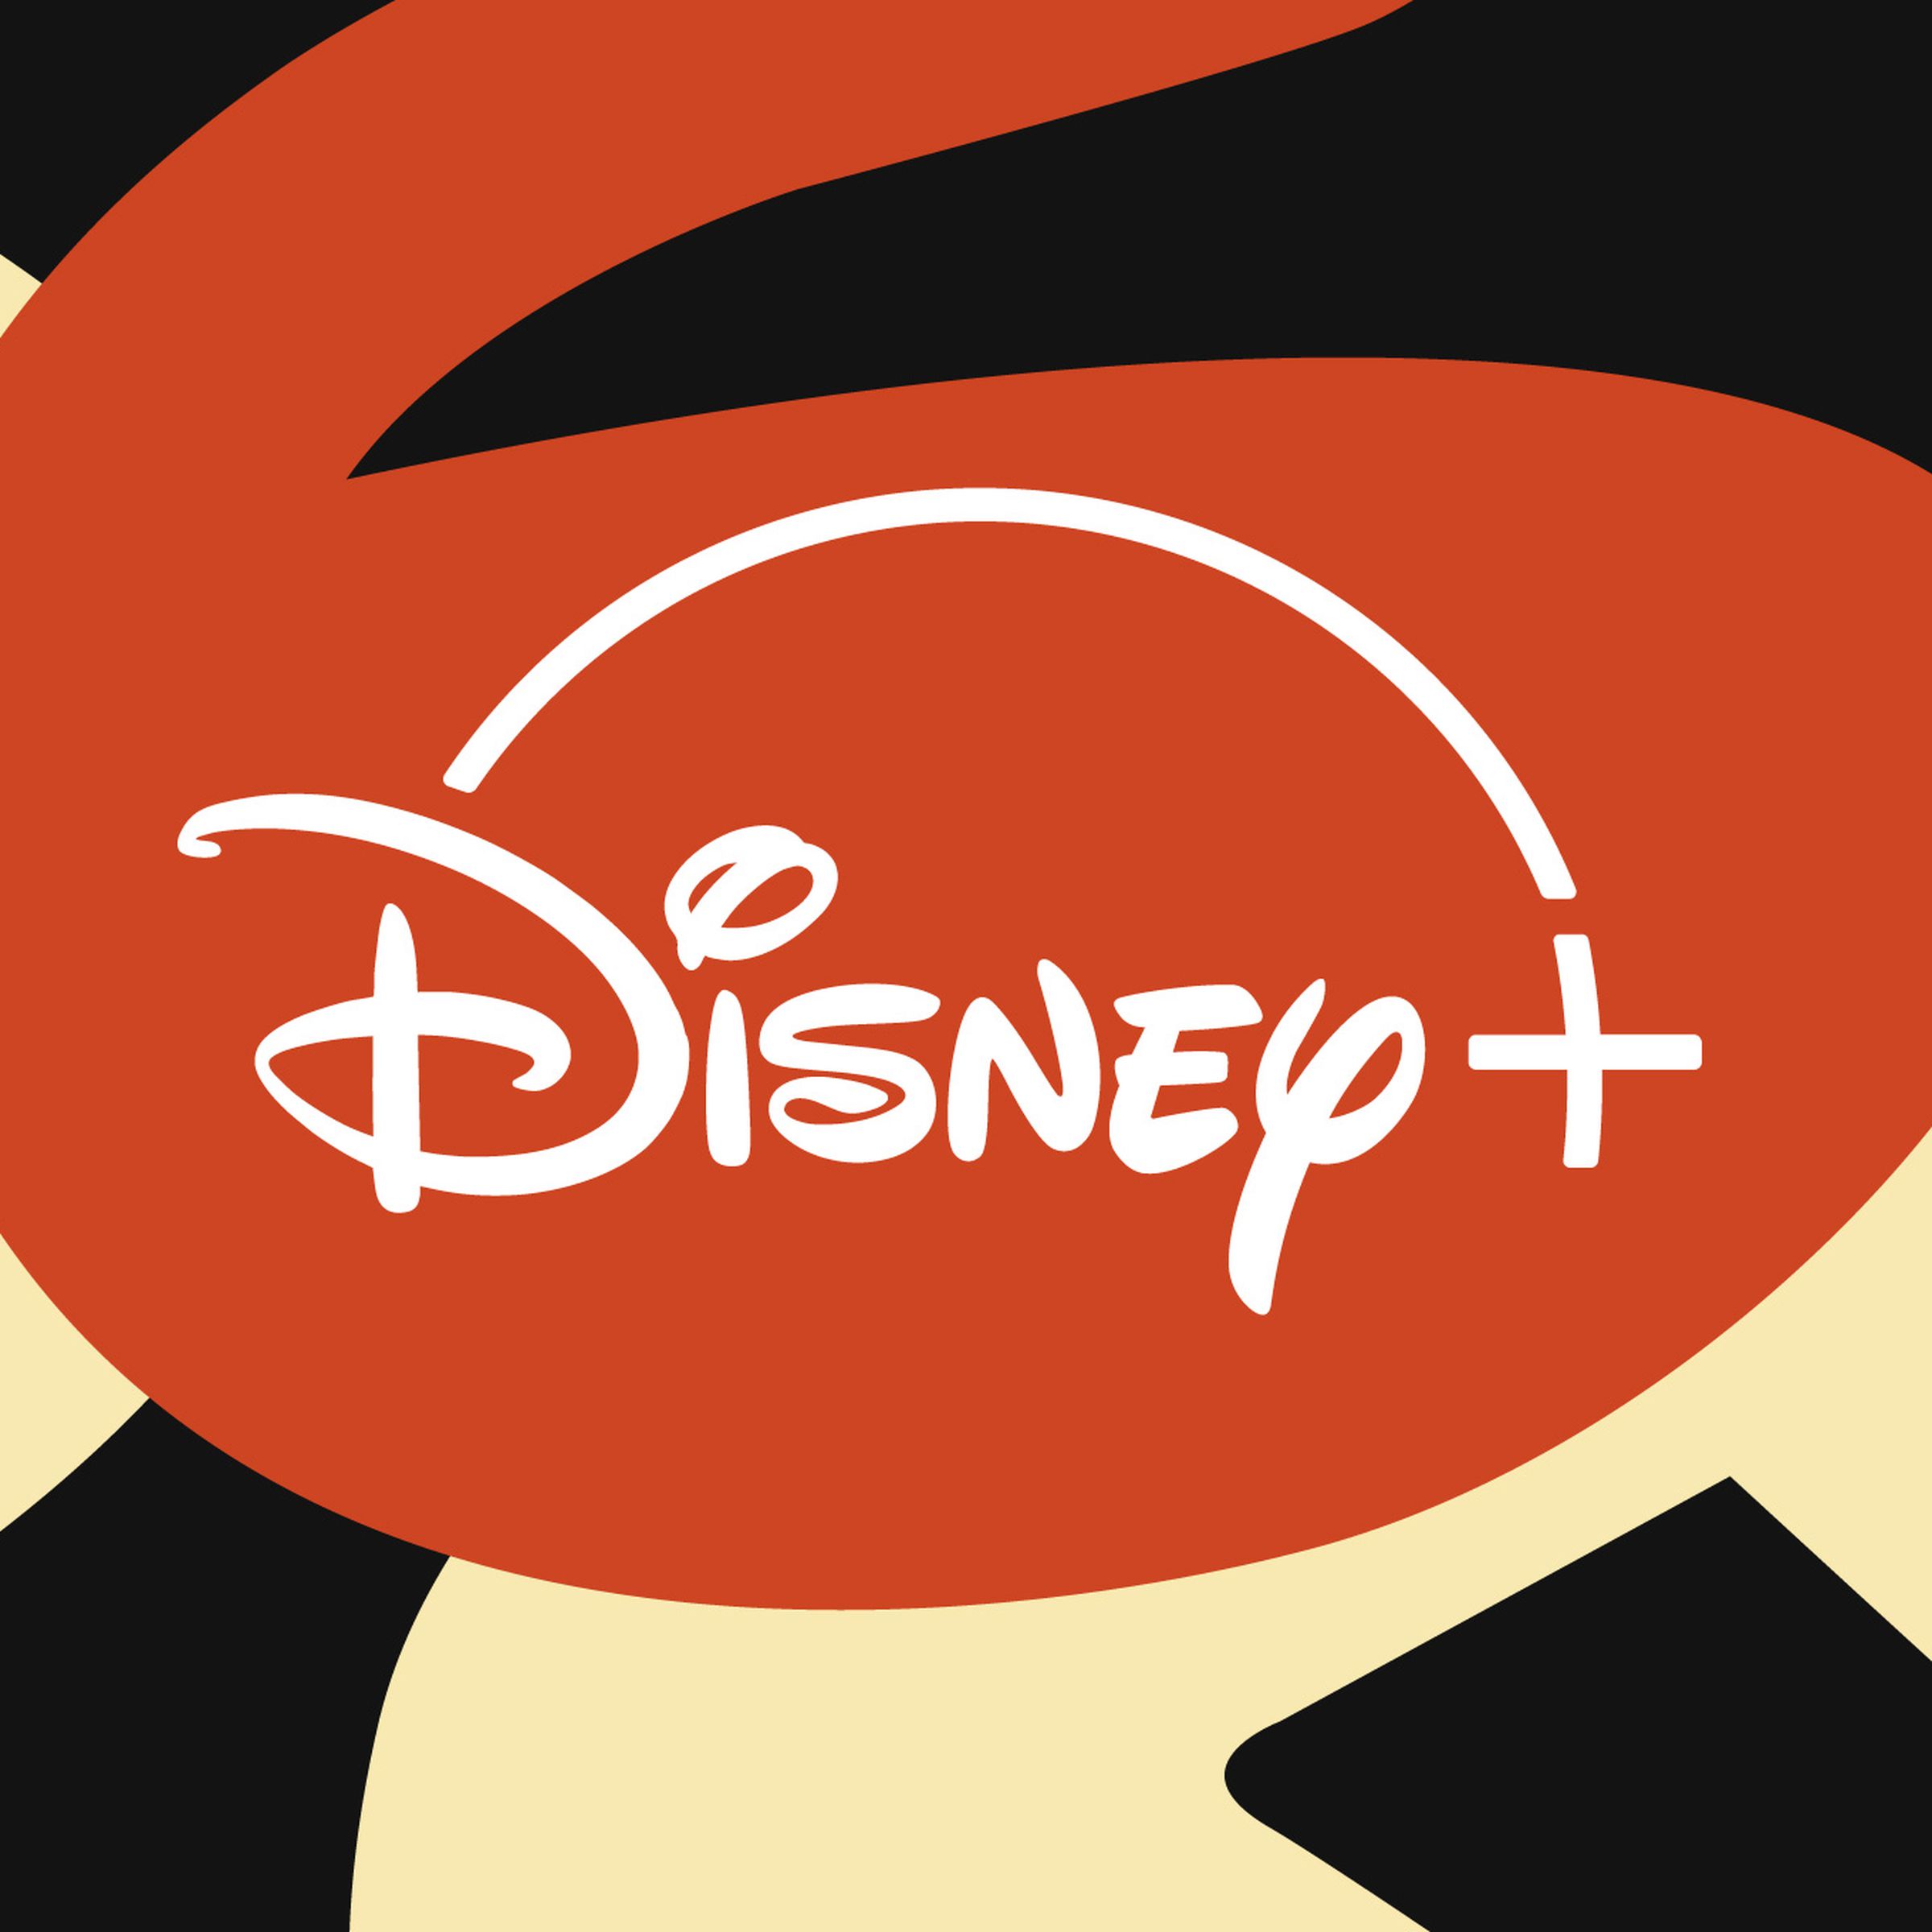 The Disney Plus logo in the middle of orange and beige circular shapes.